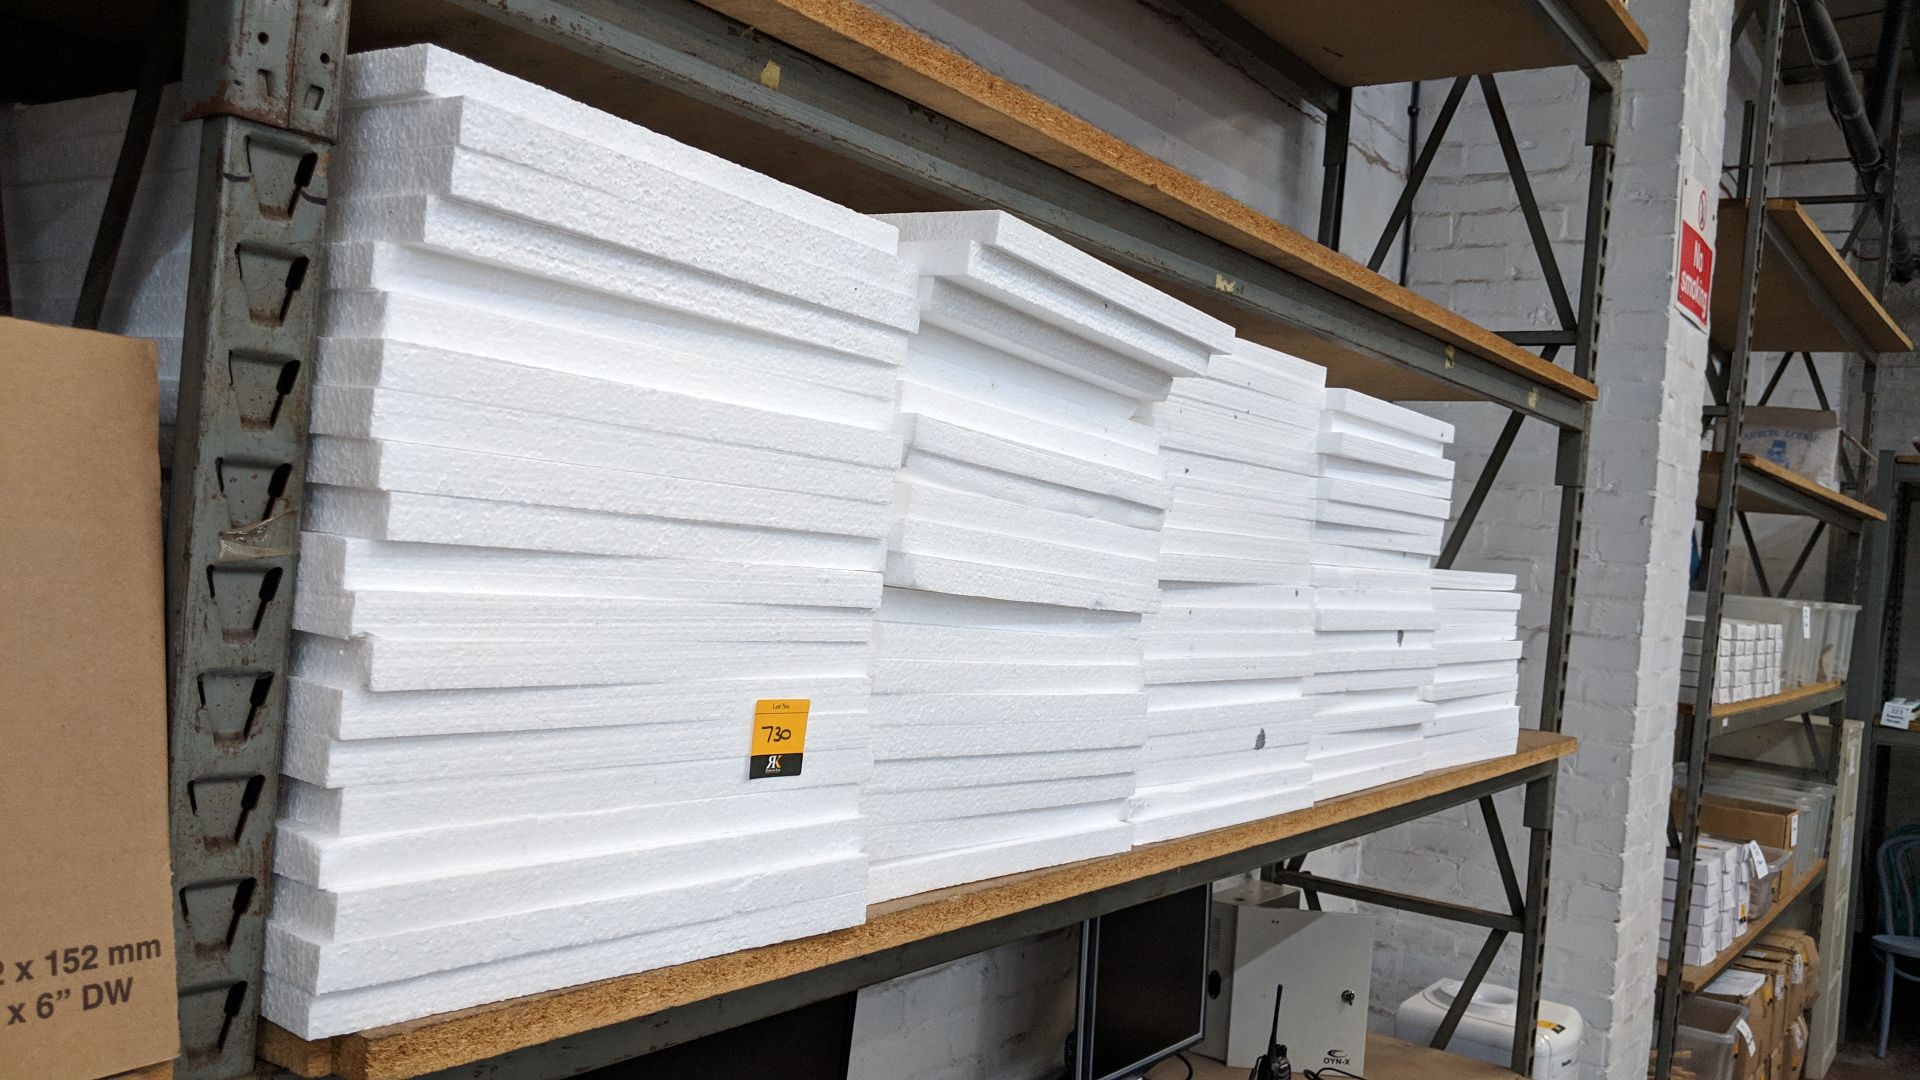 The contents of a bay of polystyrene sheets, in 5 stacks, each sheet measuring approximately 600mm x - Image 2 of 4